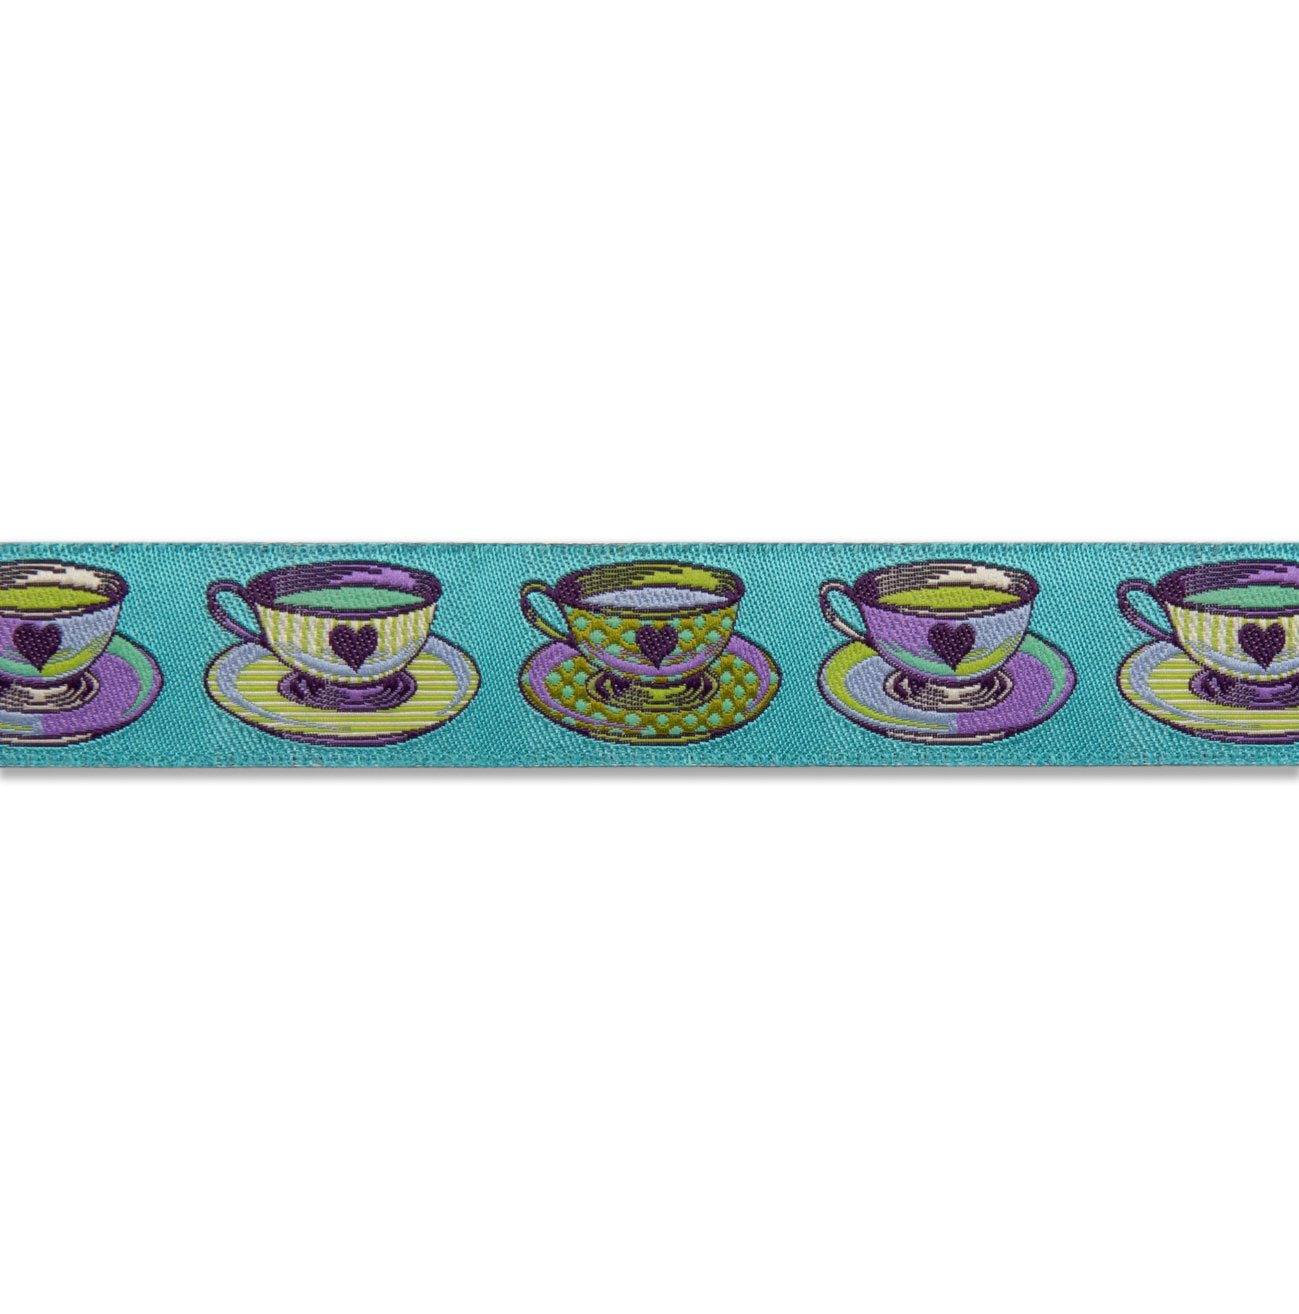 Tea Time Blue 7-8in Ribbon Curiouser & Curiouser by Tula Pink | TK-73/22mm col 1